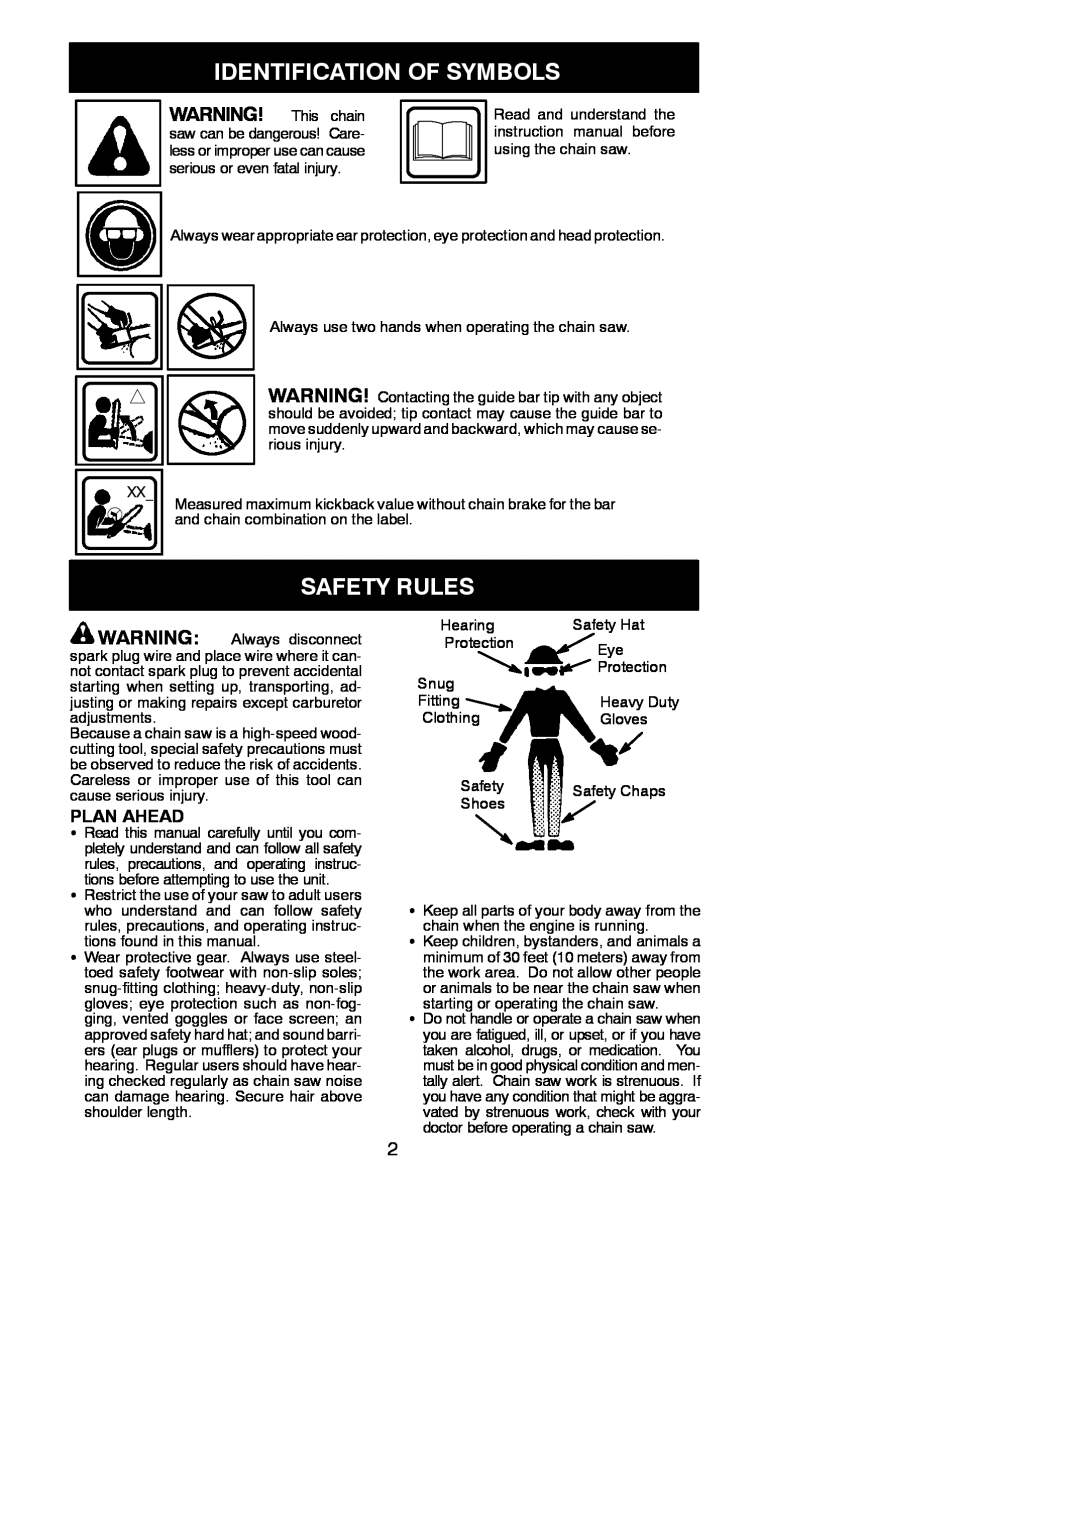 Poulan 530165225, 2004-09 instruction manual Identification Of Symbols, Safety Rules, Plan Ahead 